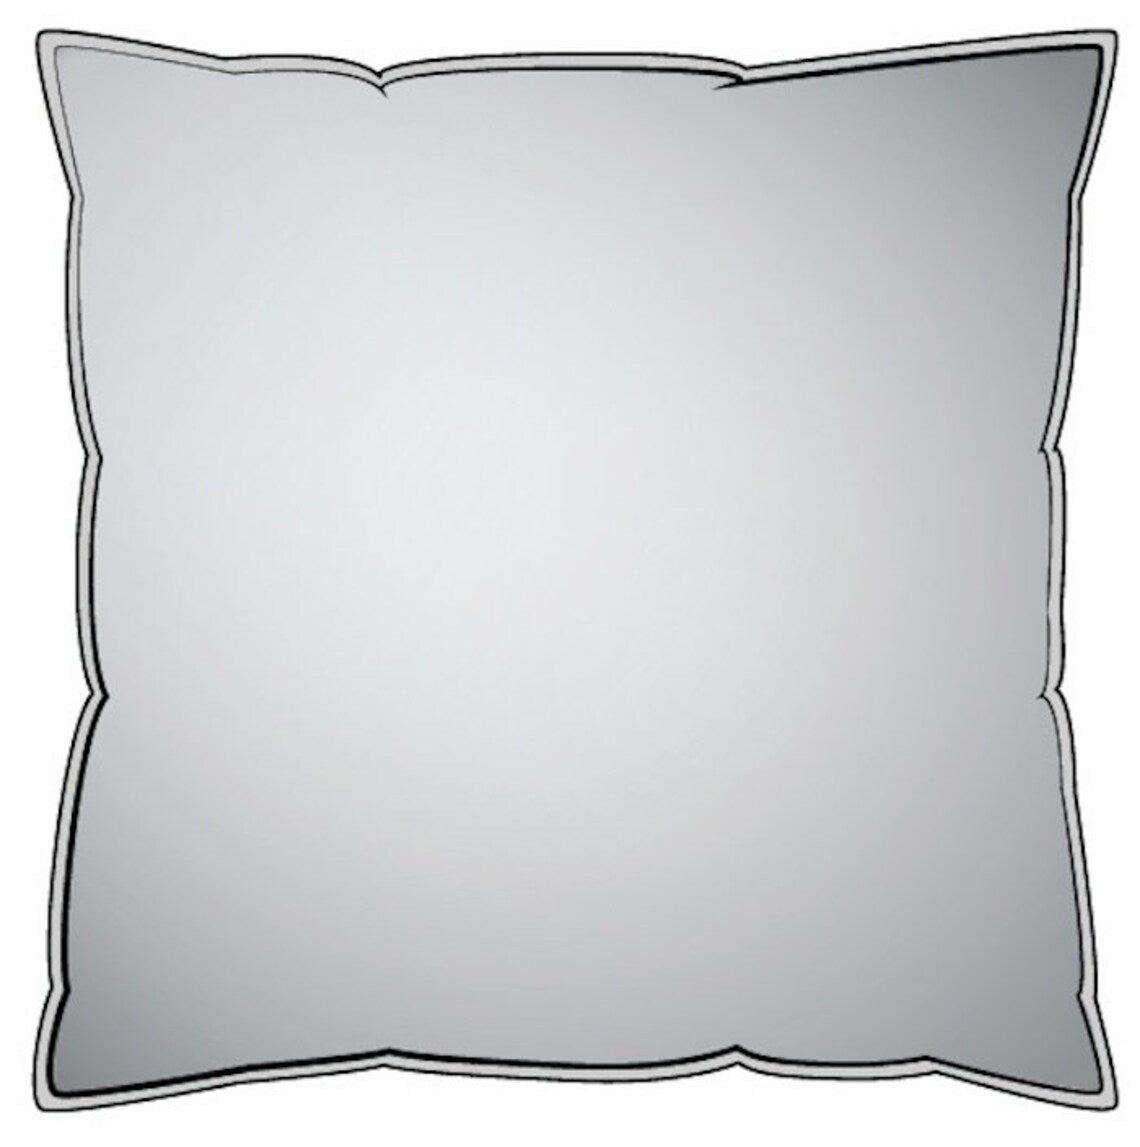 Decorative Pillows in Storm Gray Large Gingham Check on White